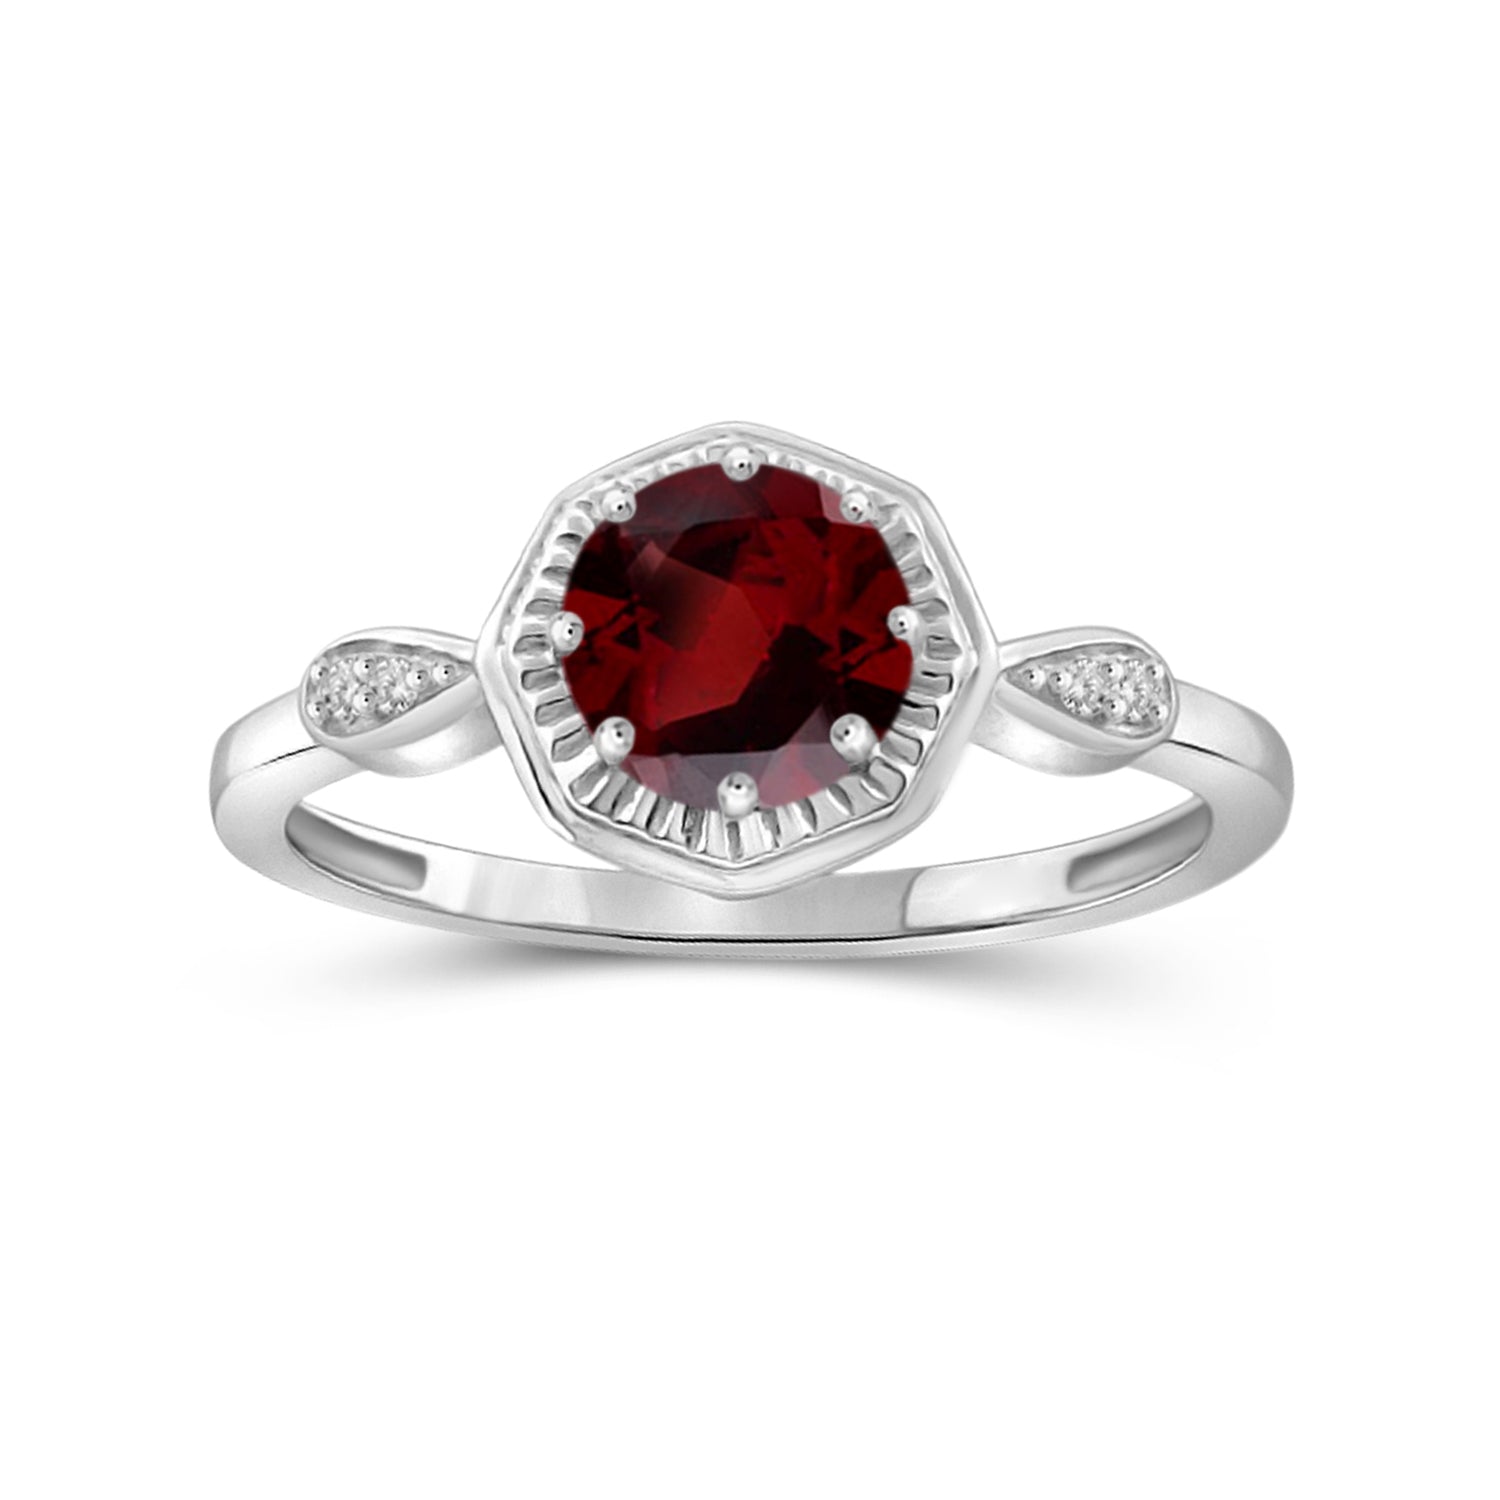 1.20 Carat T.G.W. Ruby Gemstone and White Diamond Accent Sterling Silver Ring